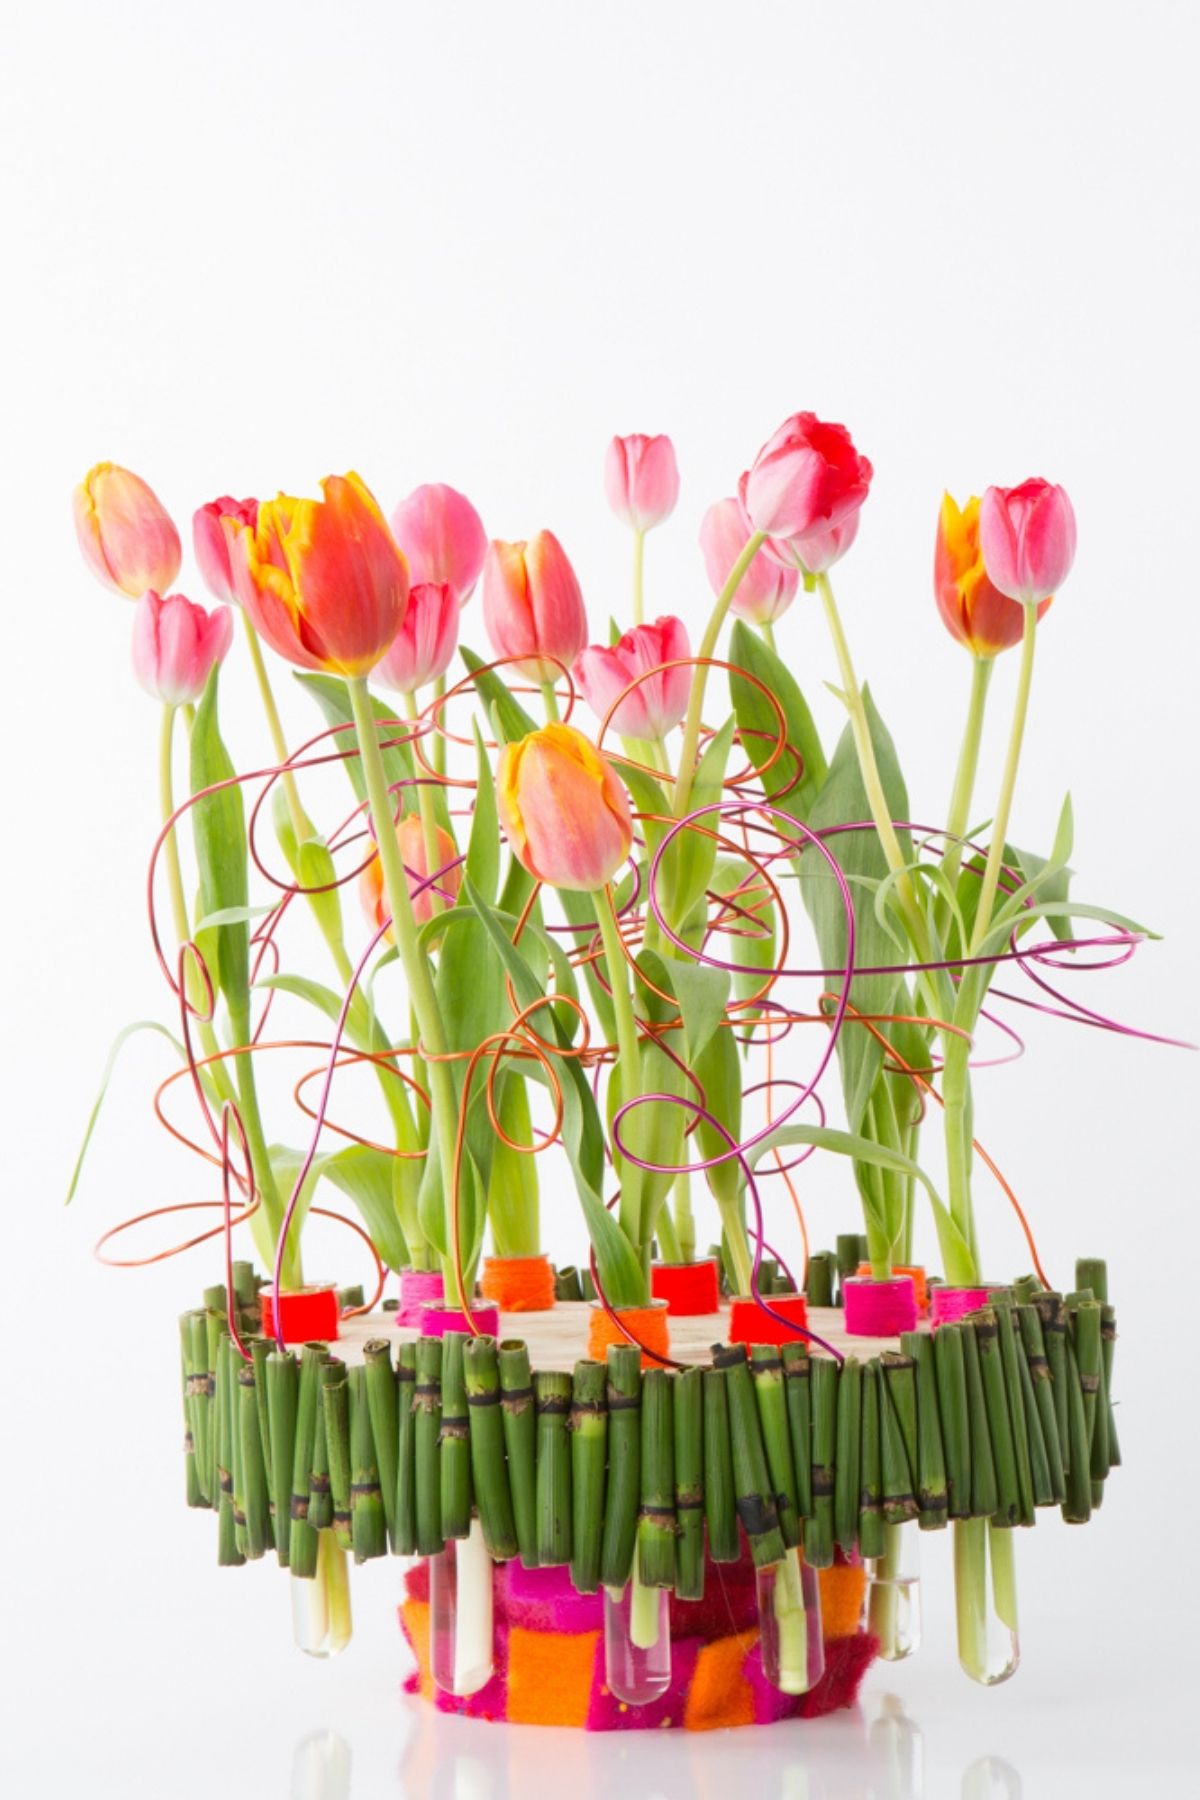 Tulips as Easter Flowers